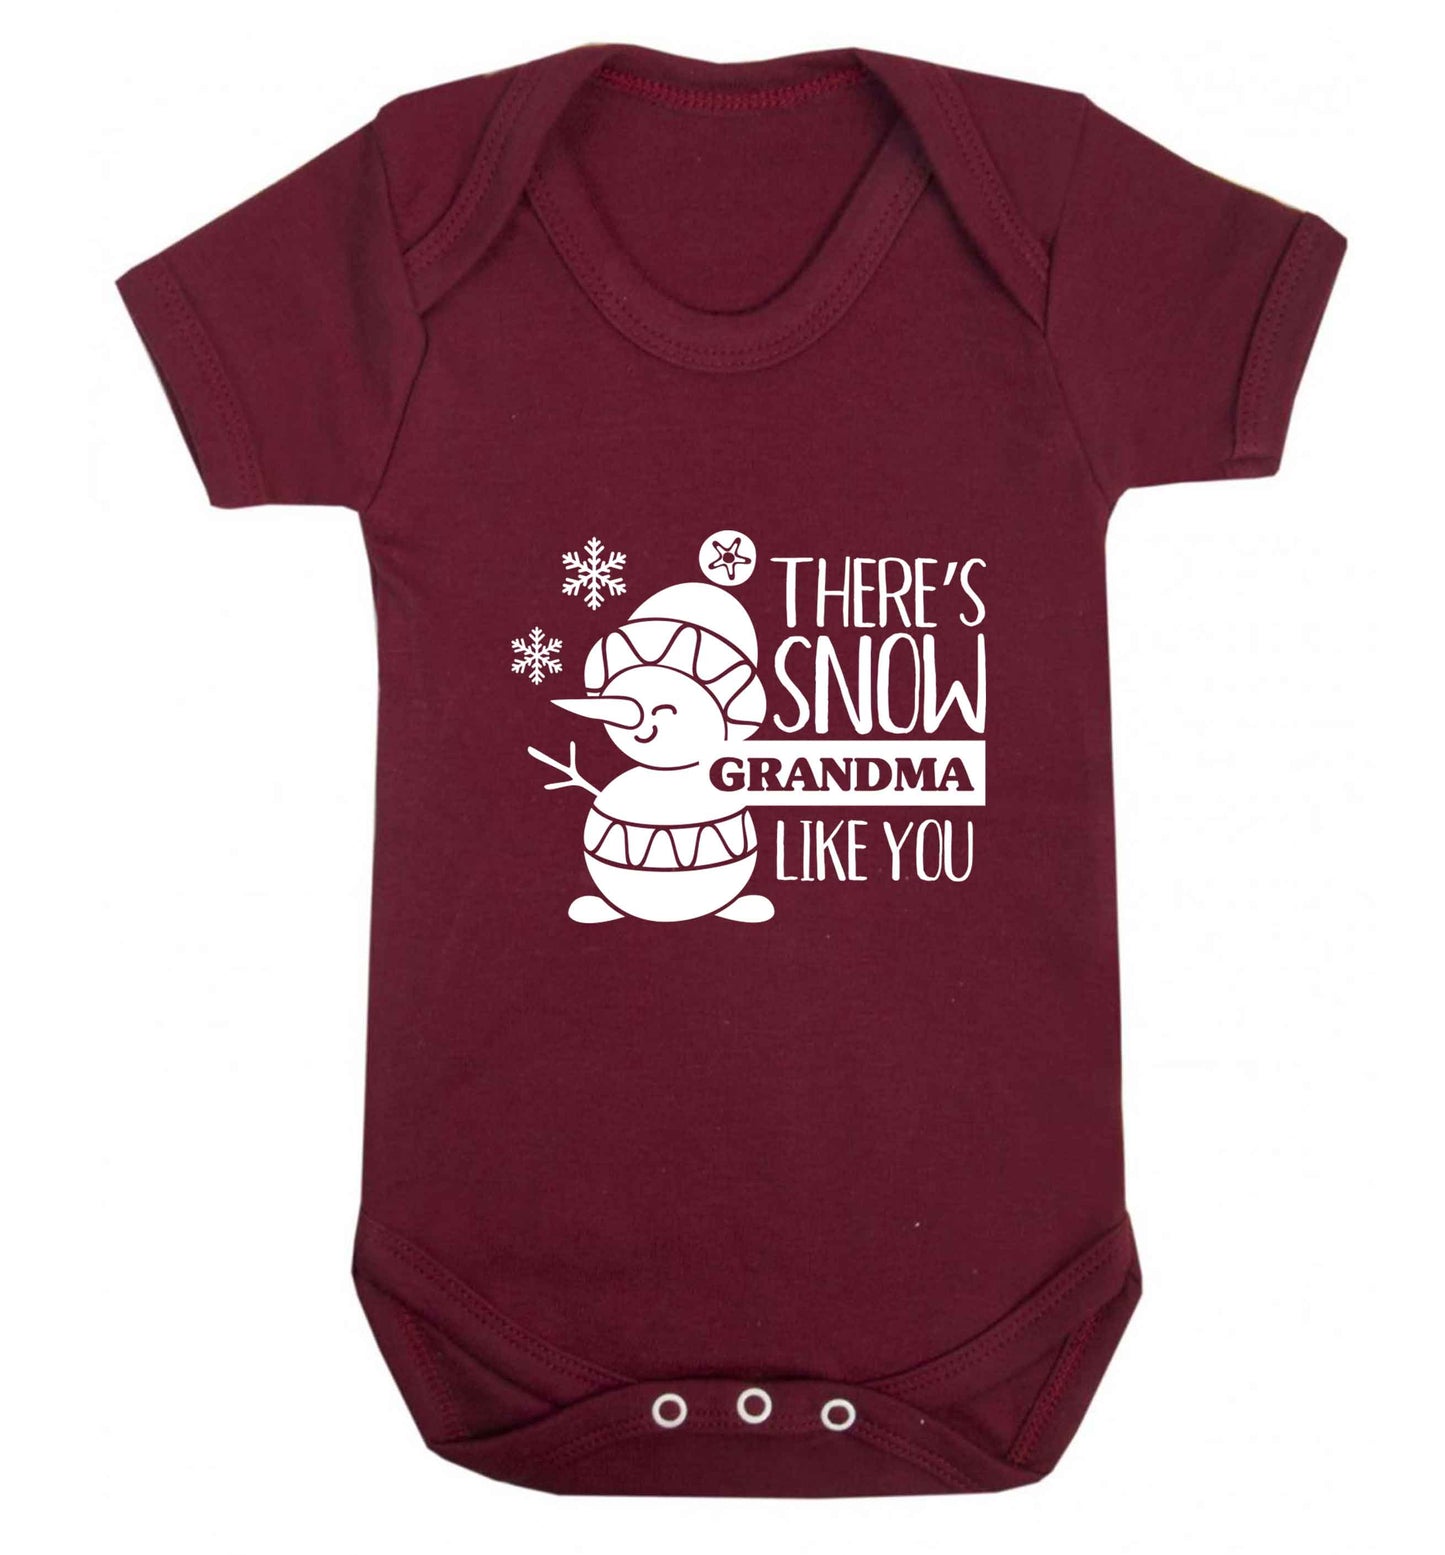 There's snow grandma like you baby vest maroon 18-24 months